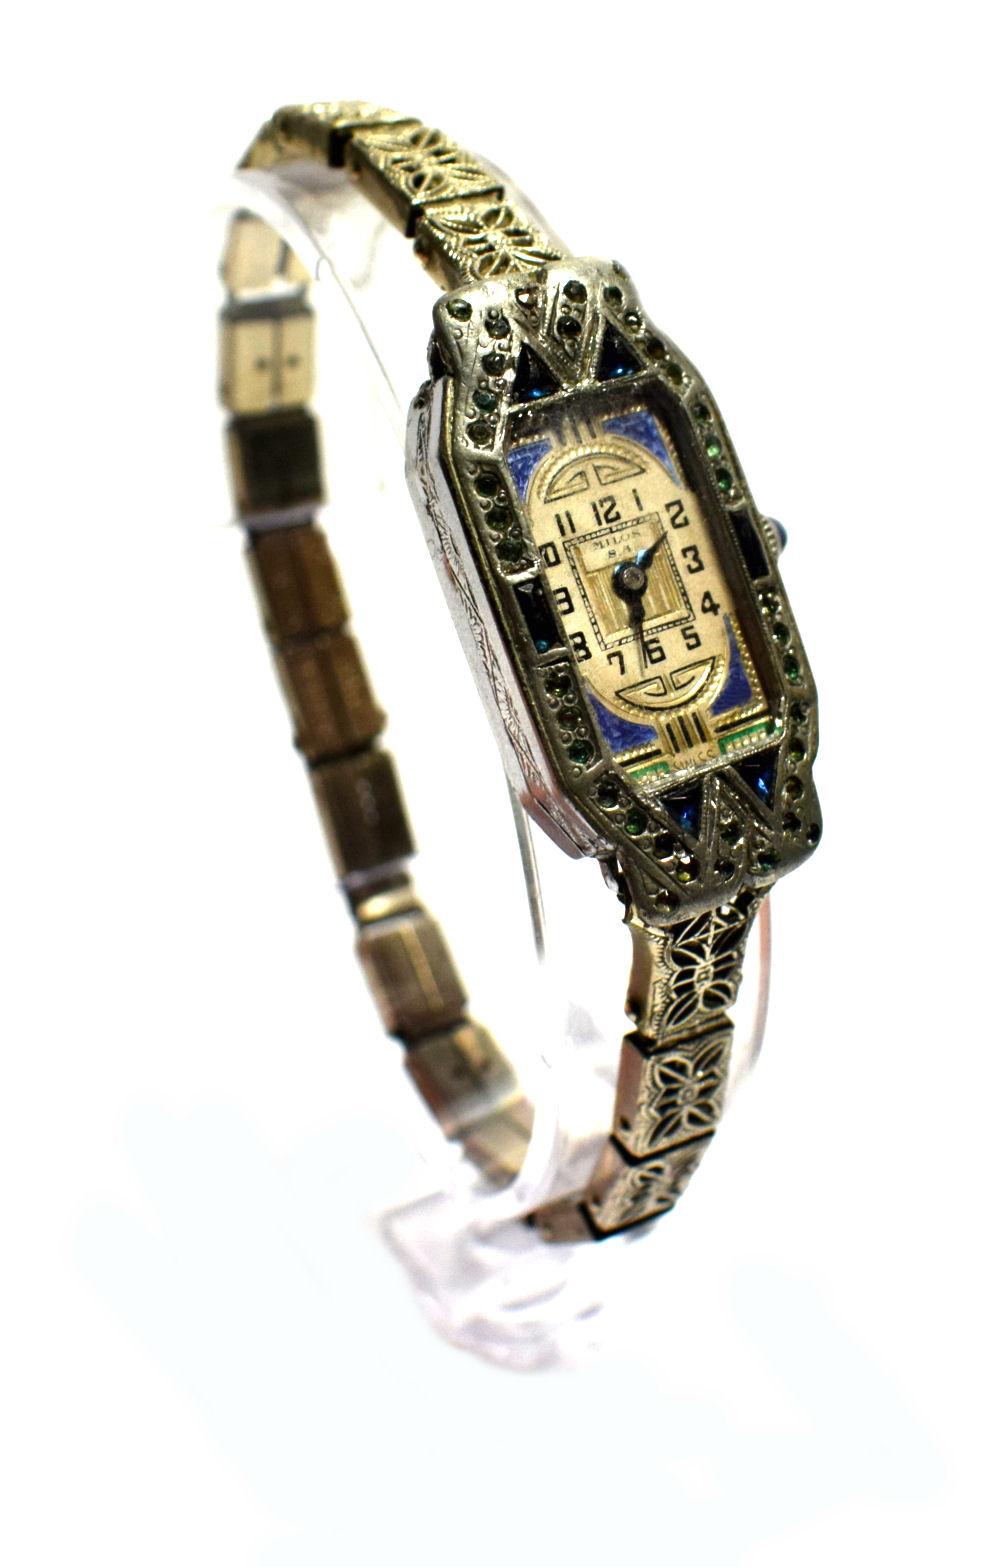 1930s Art Deco Ladies Sapphire Marcasite Enamel Watch with a Filigree Band 2